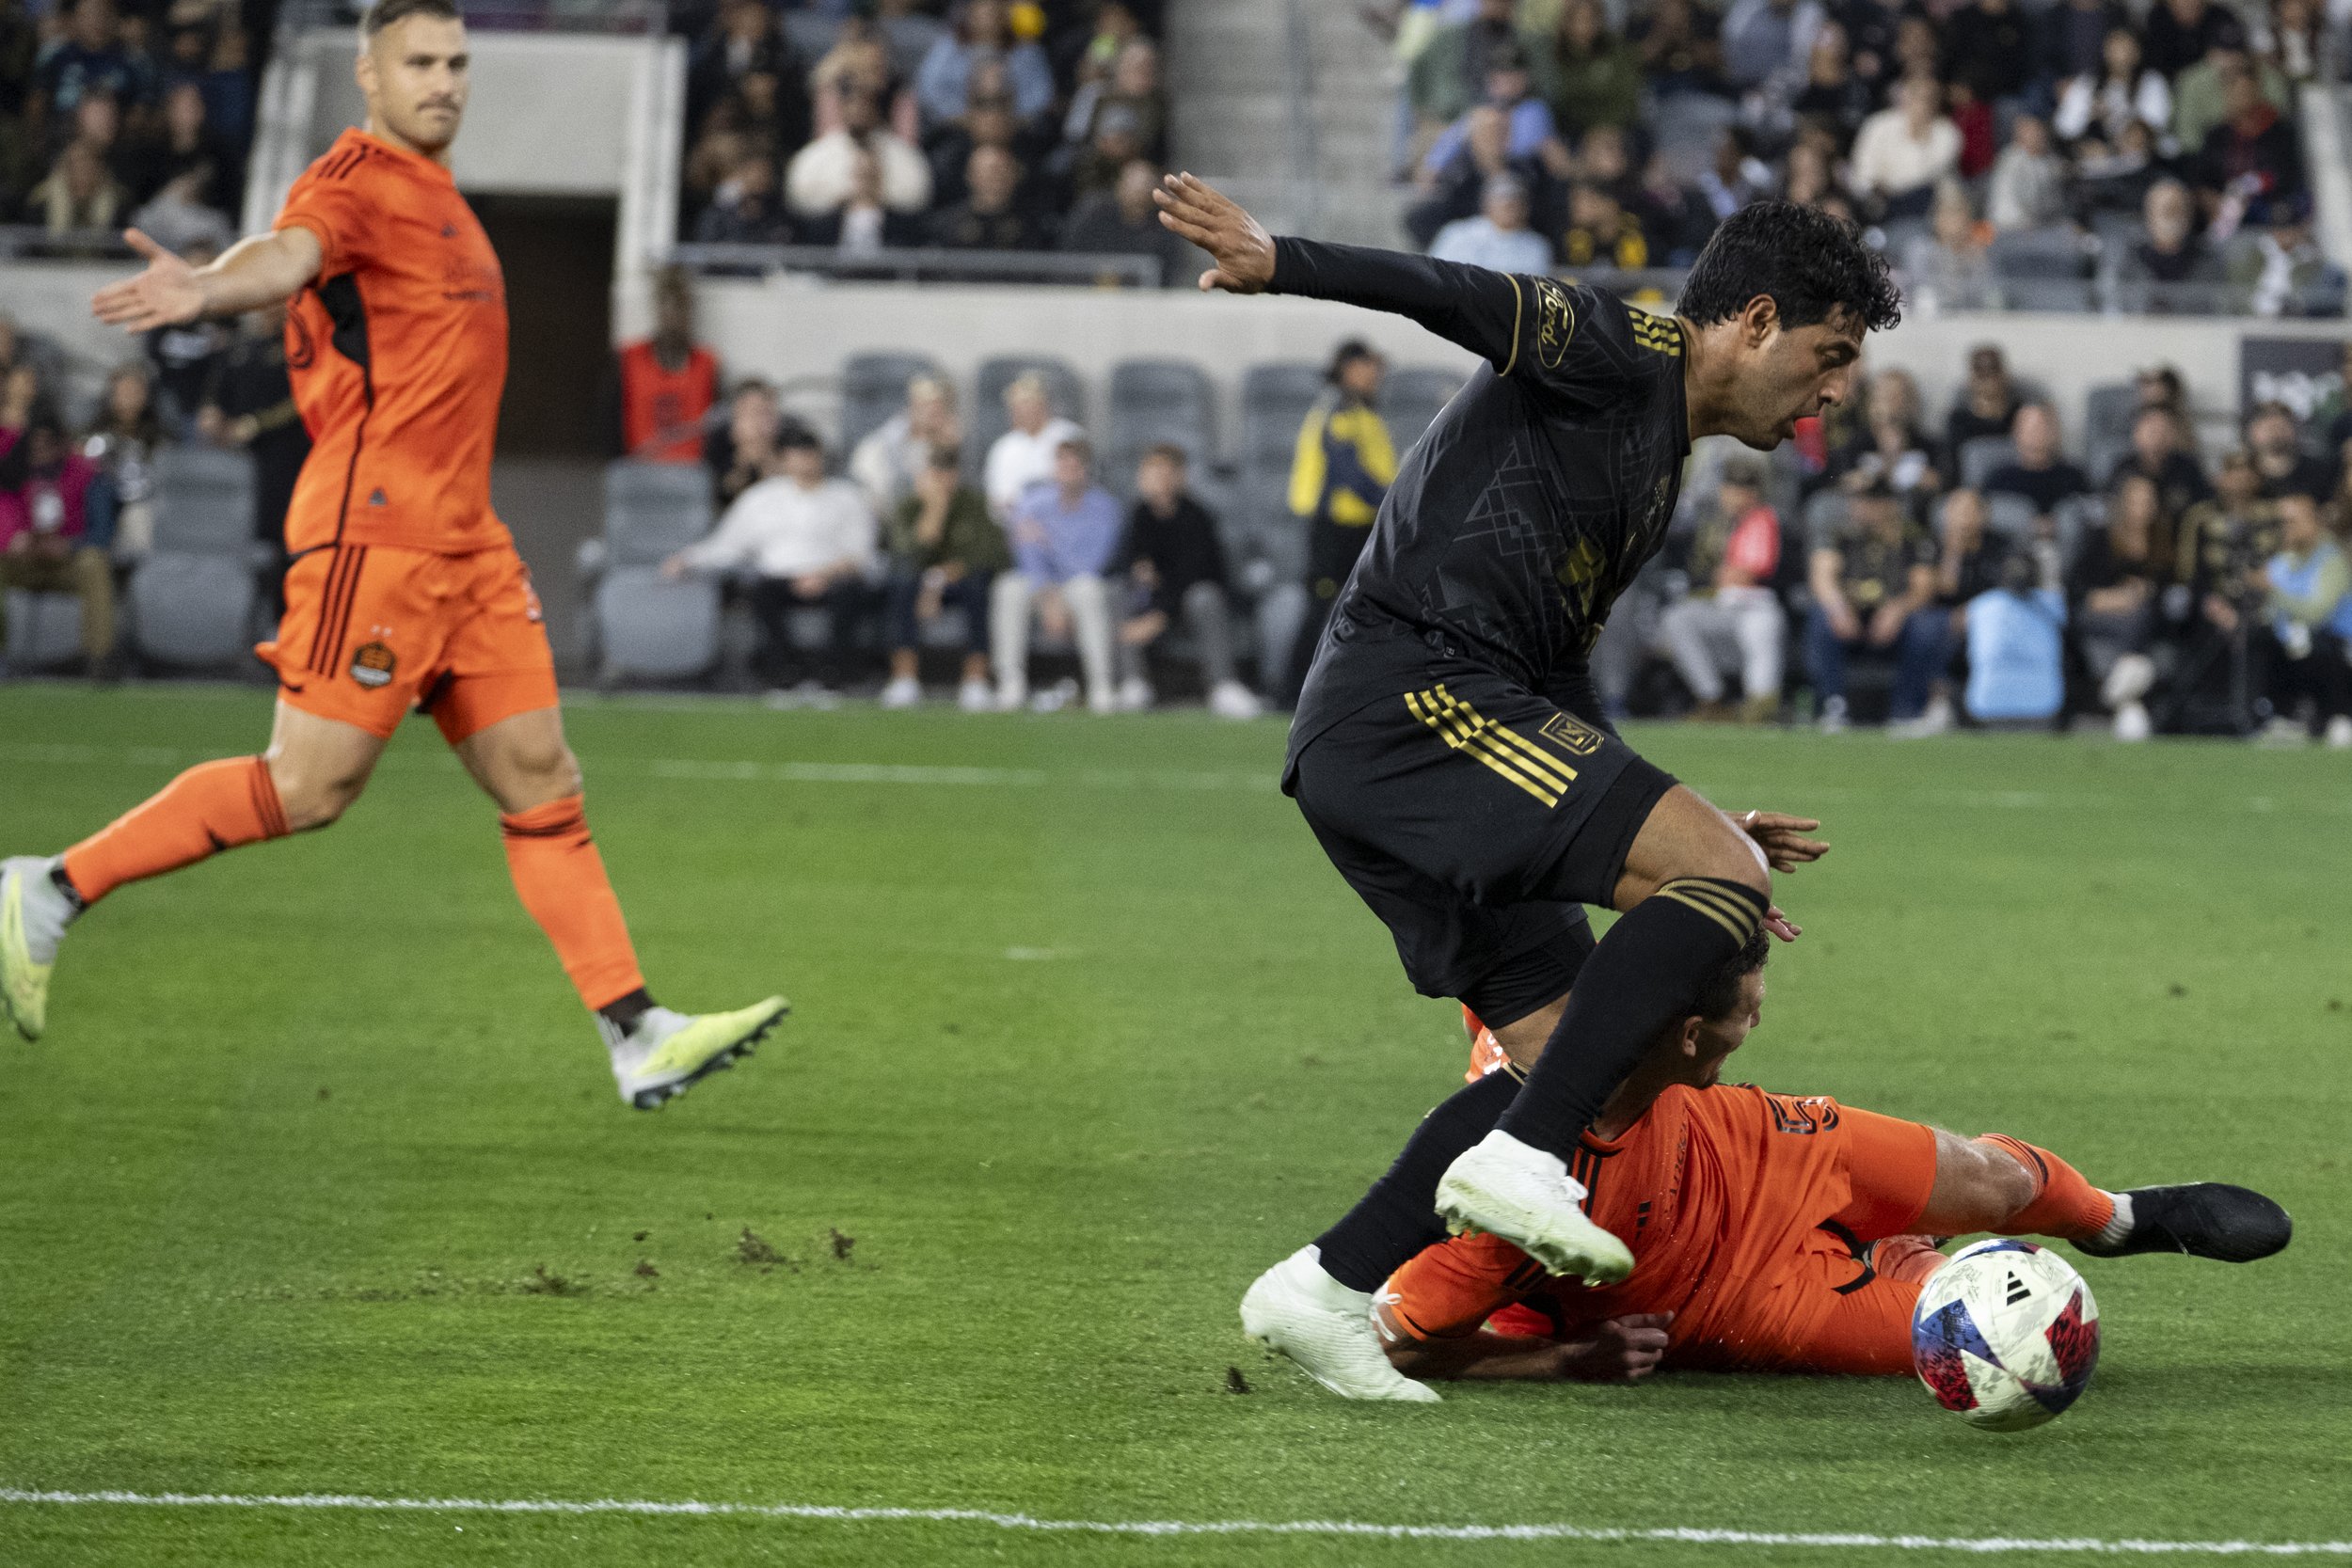  Carlos Vela, Forward #10 of LAFC, and Daniel Stores Defender #5 of the Houston Dynamo run for the ball during the Major League Soccer (MLS) match on Wednesday, June 14, at the Bank of Montreal (BMO) Stadium in Los Angeles, California. (Anna Sophia M